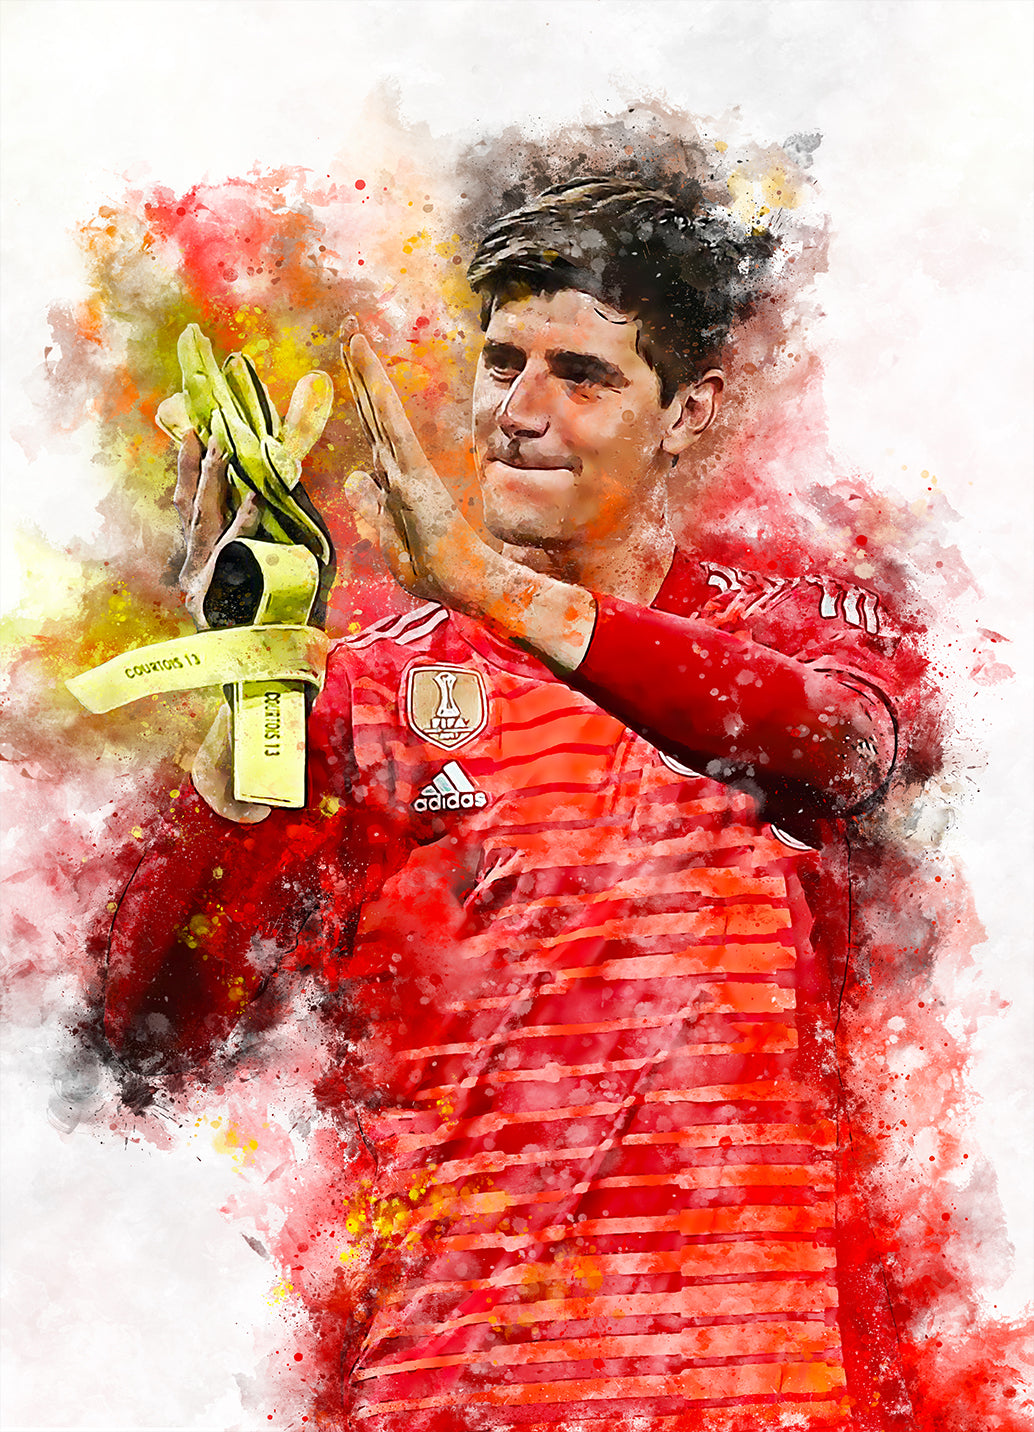 Courtois voetbal poster